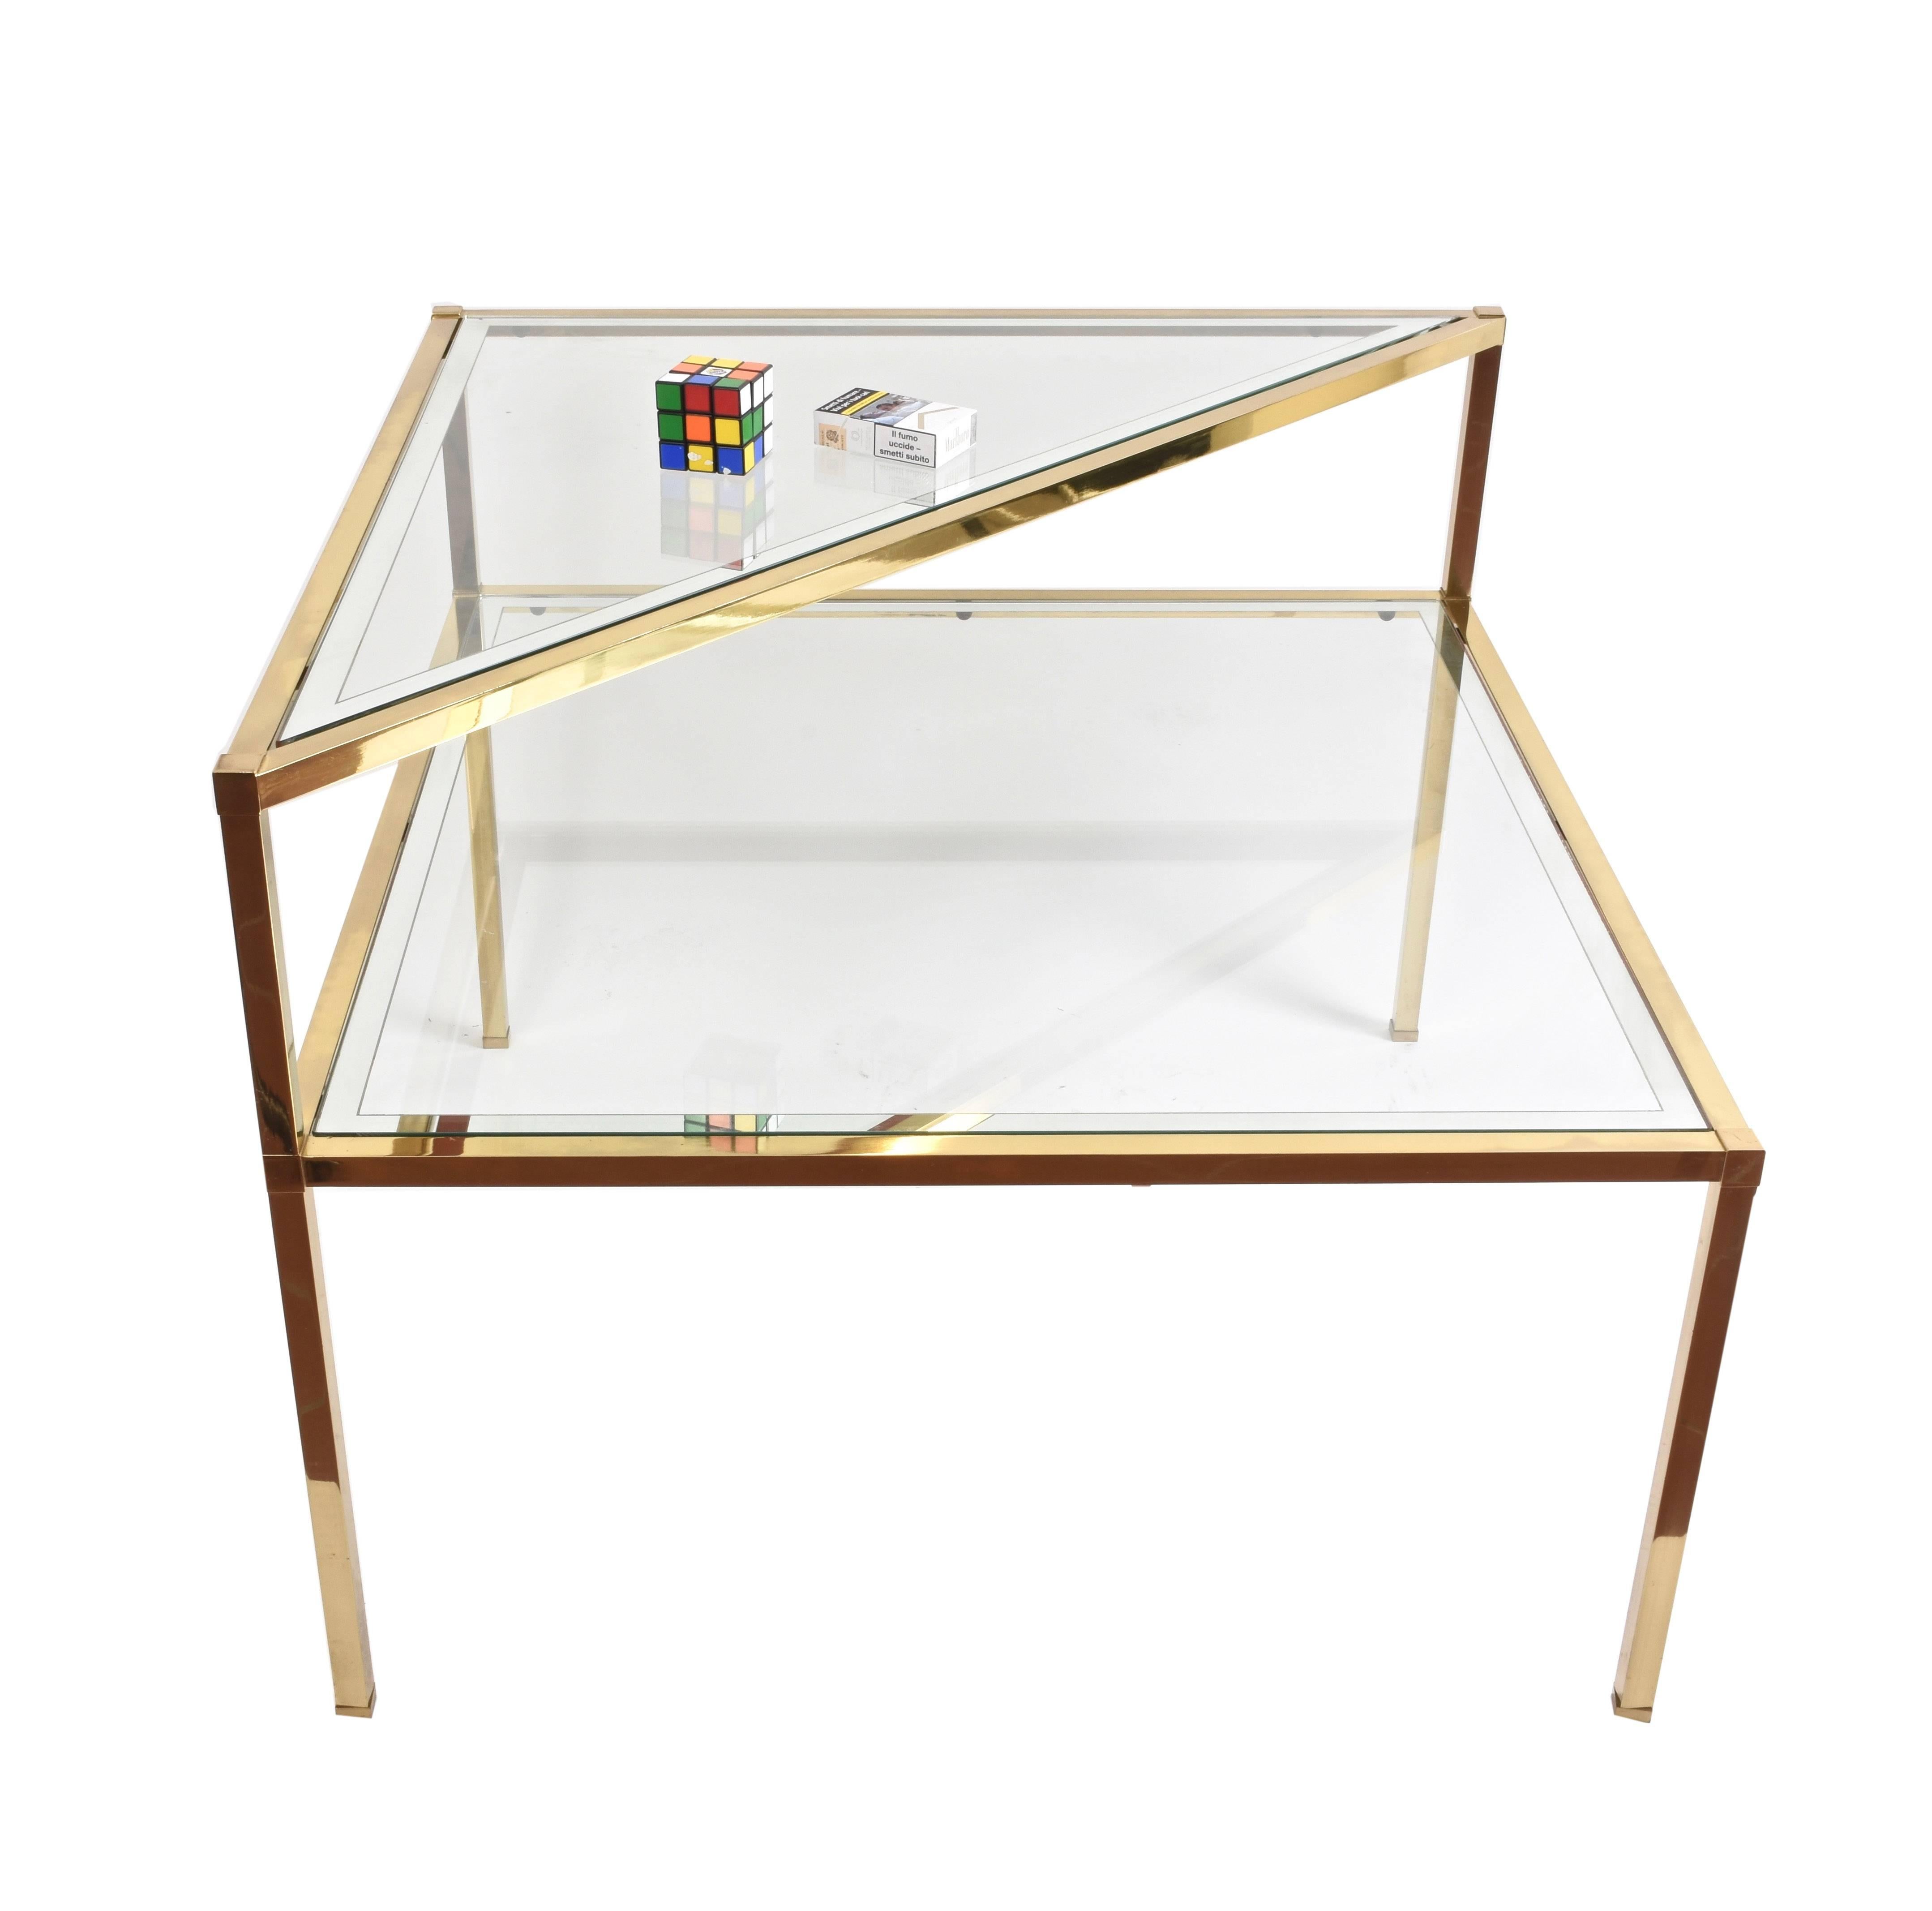 Late 20th Century Glass and Brass Double Shelf Italian Coffee Tables with Mirrored Edge, 1970s